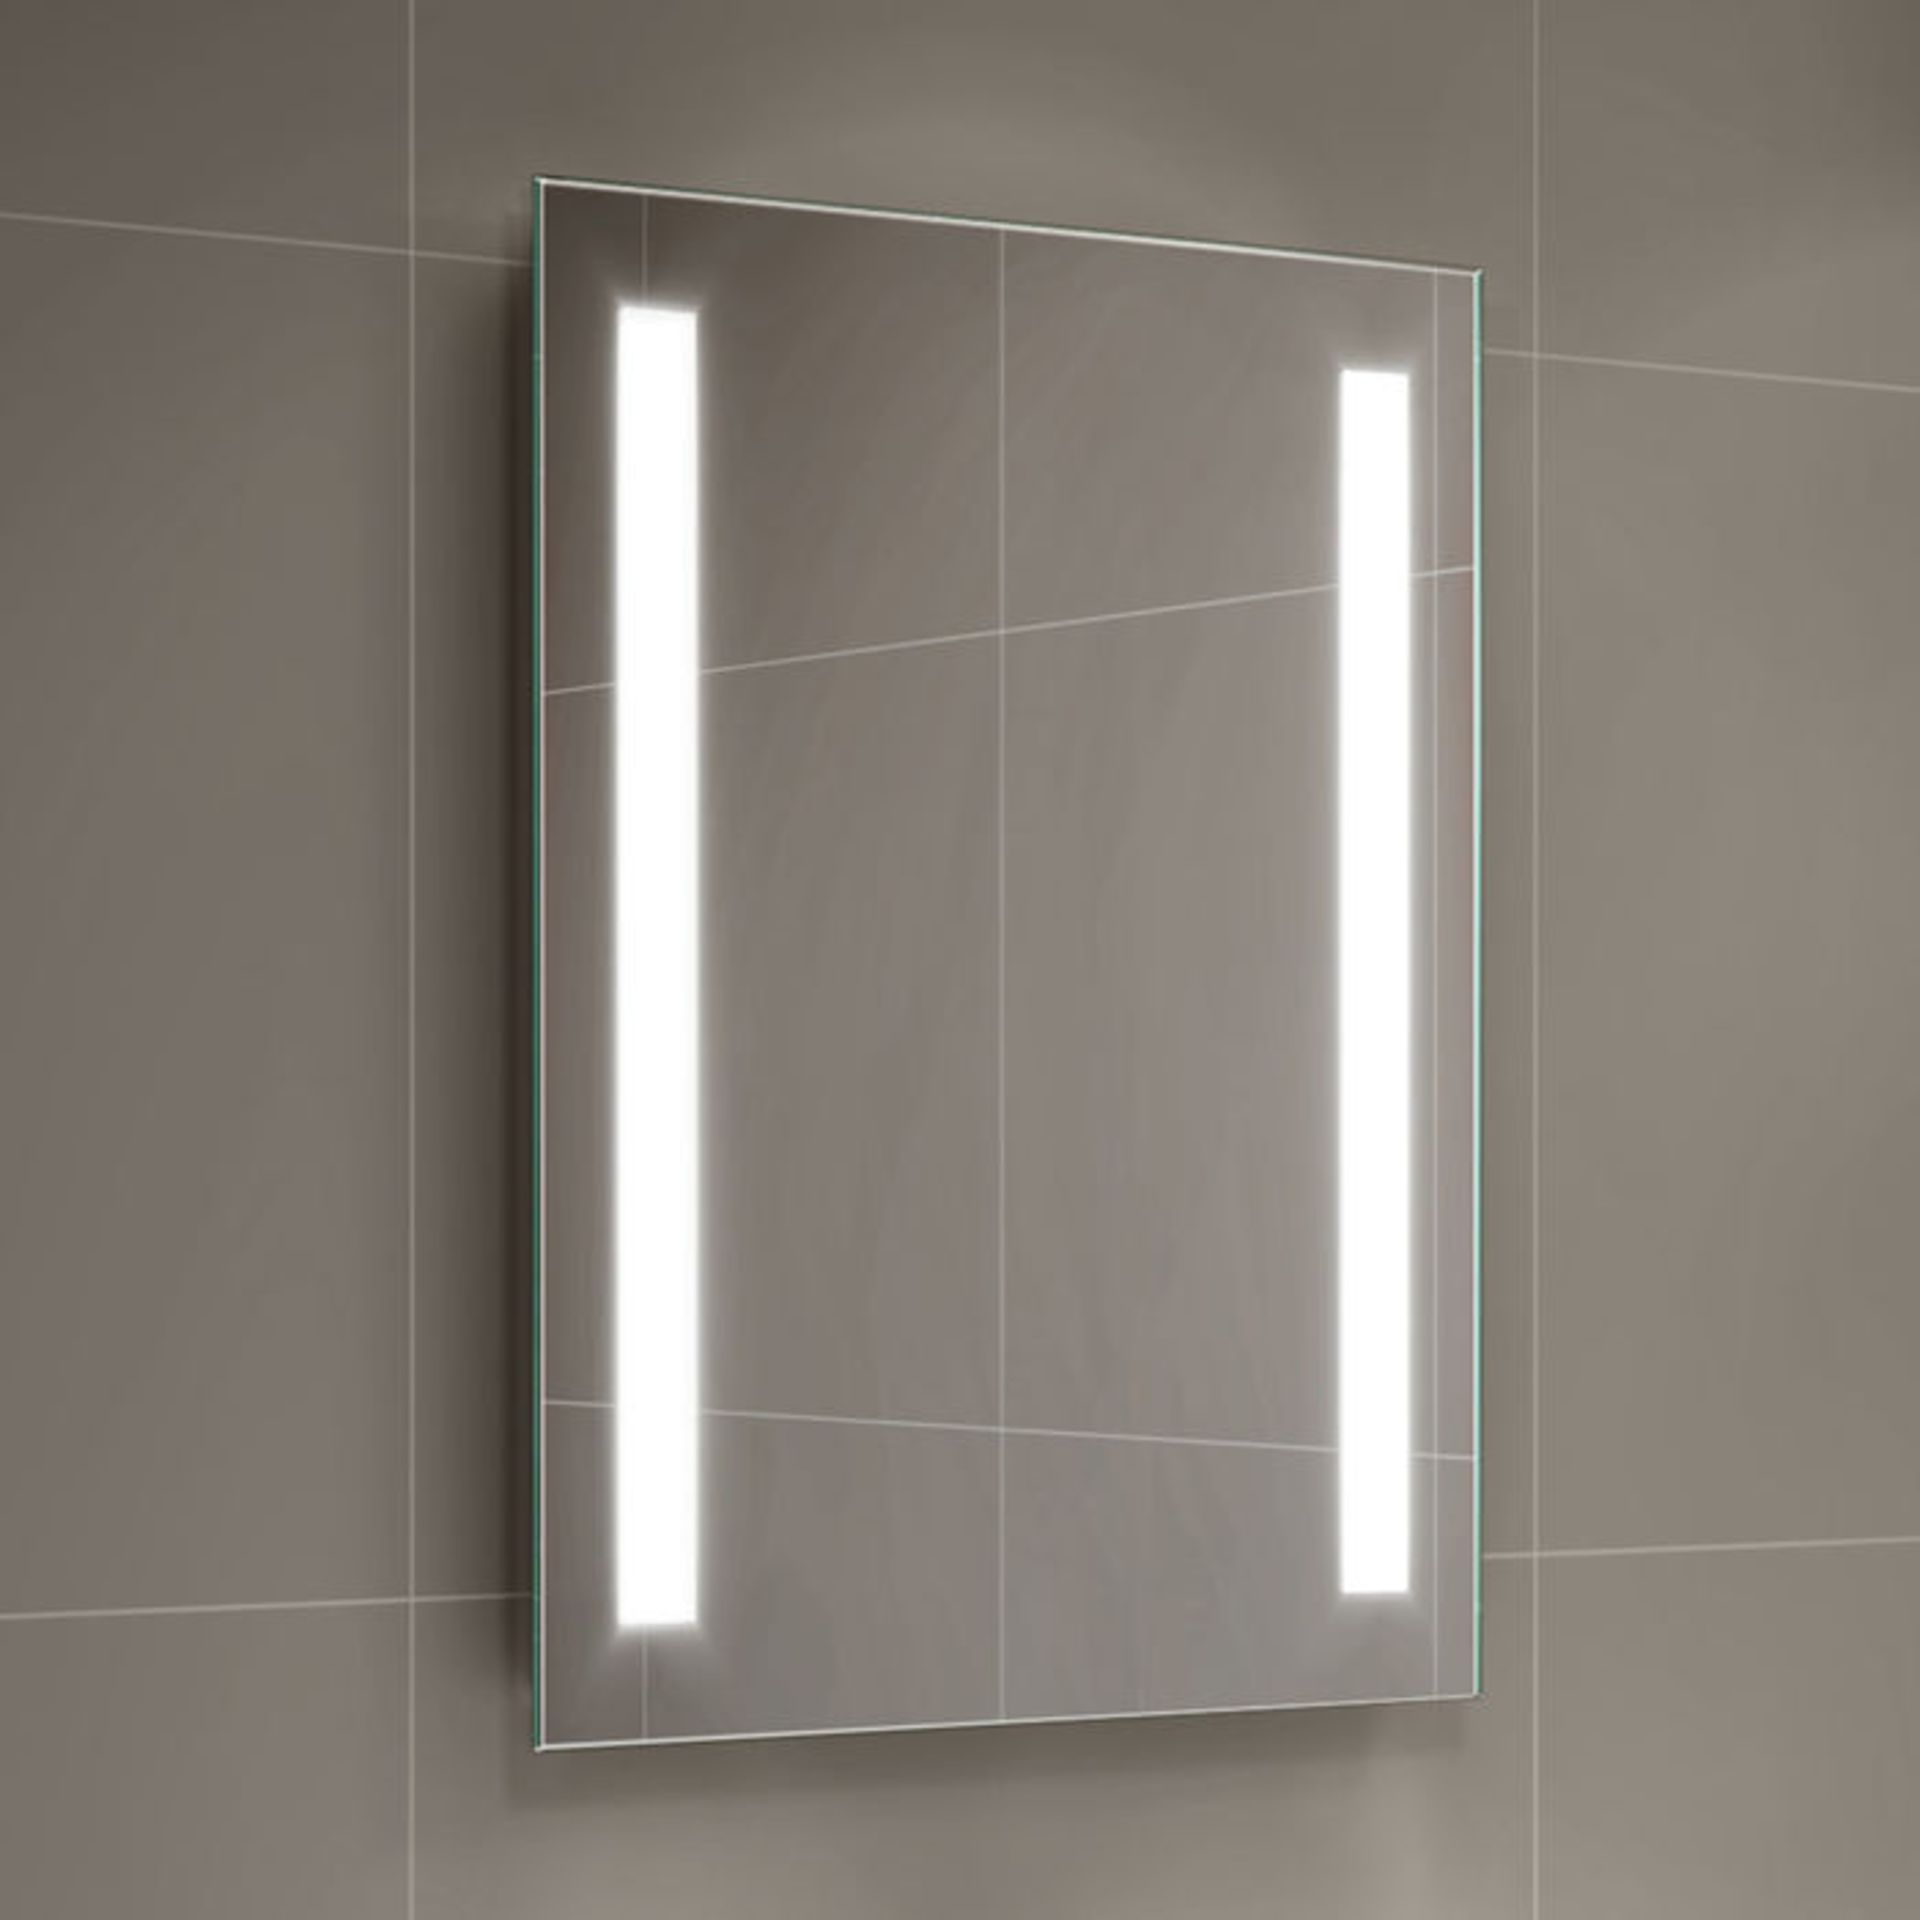 (T65) 500x700mm Omega LED Mirror - Battery Operated. Energy saving controlled On / Off